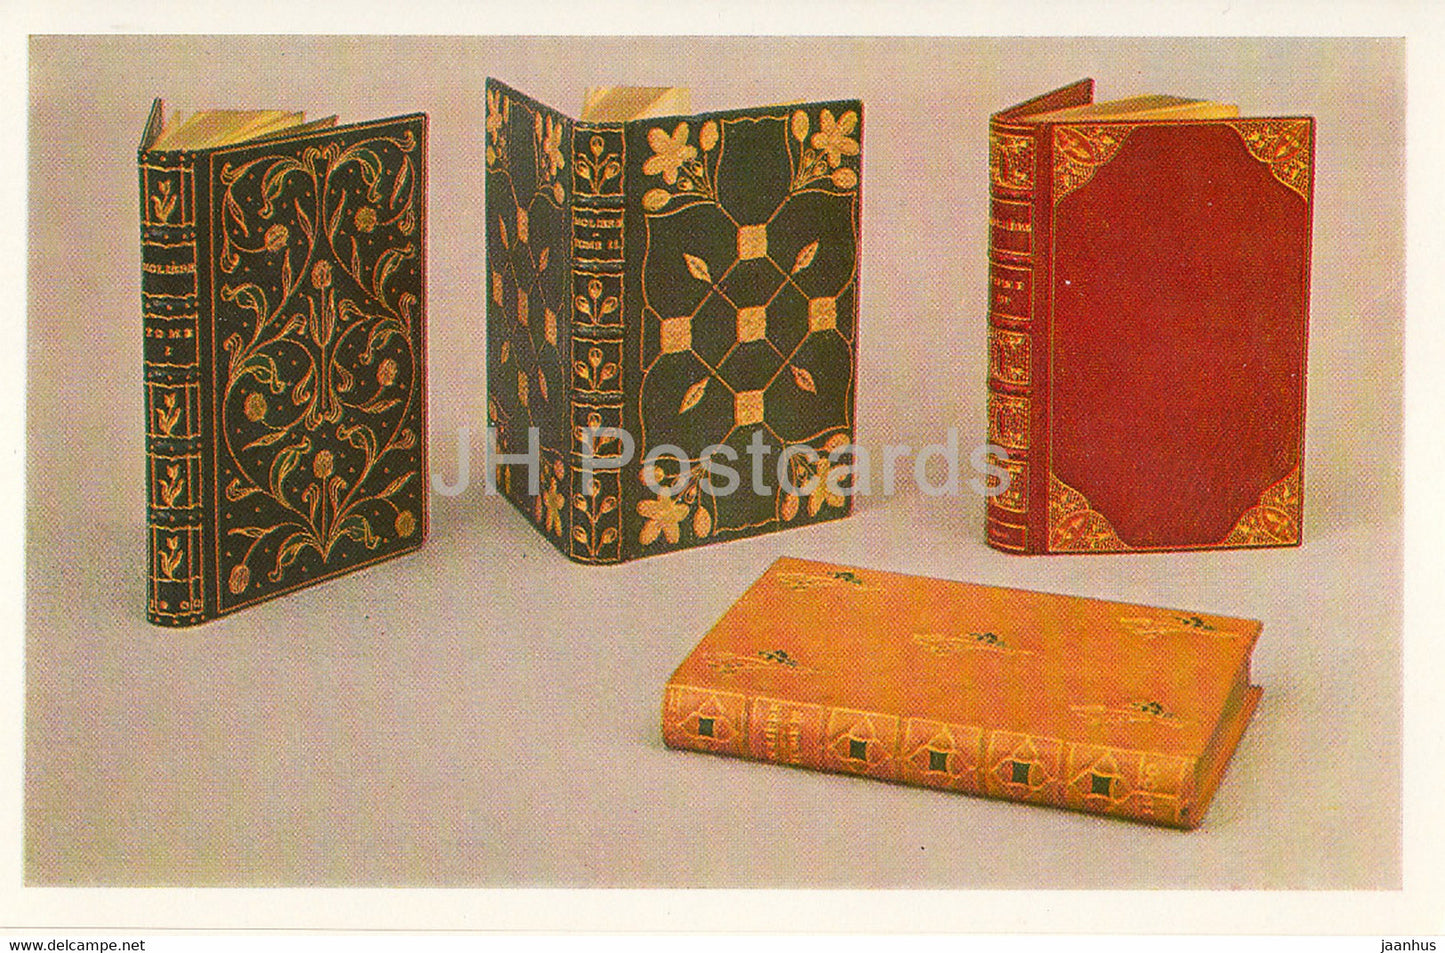 The Hermitage, Leningrad , English Applied Art - Book-covers. Oxford. 1900 - Russia - USSR - 1983 - used - JH Postcards